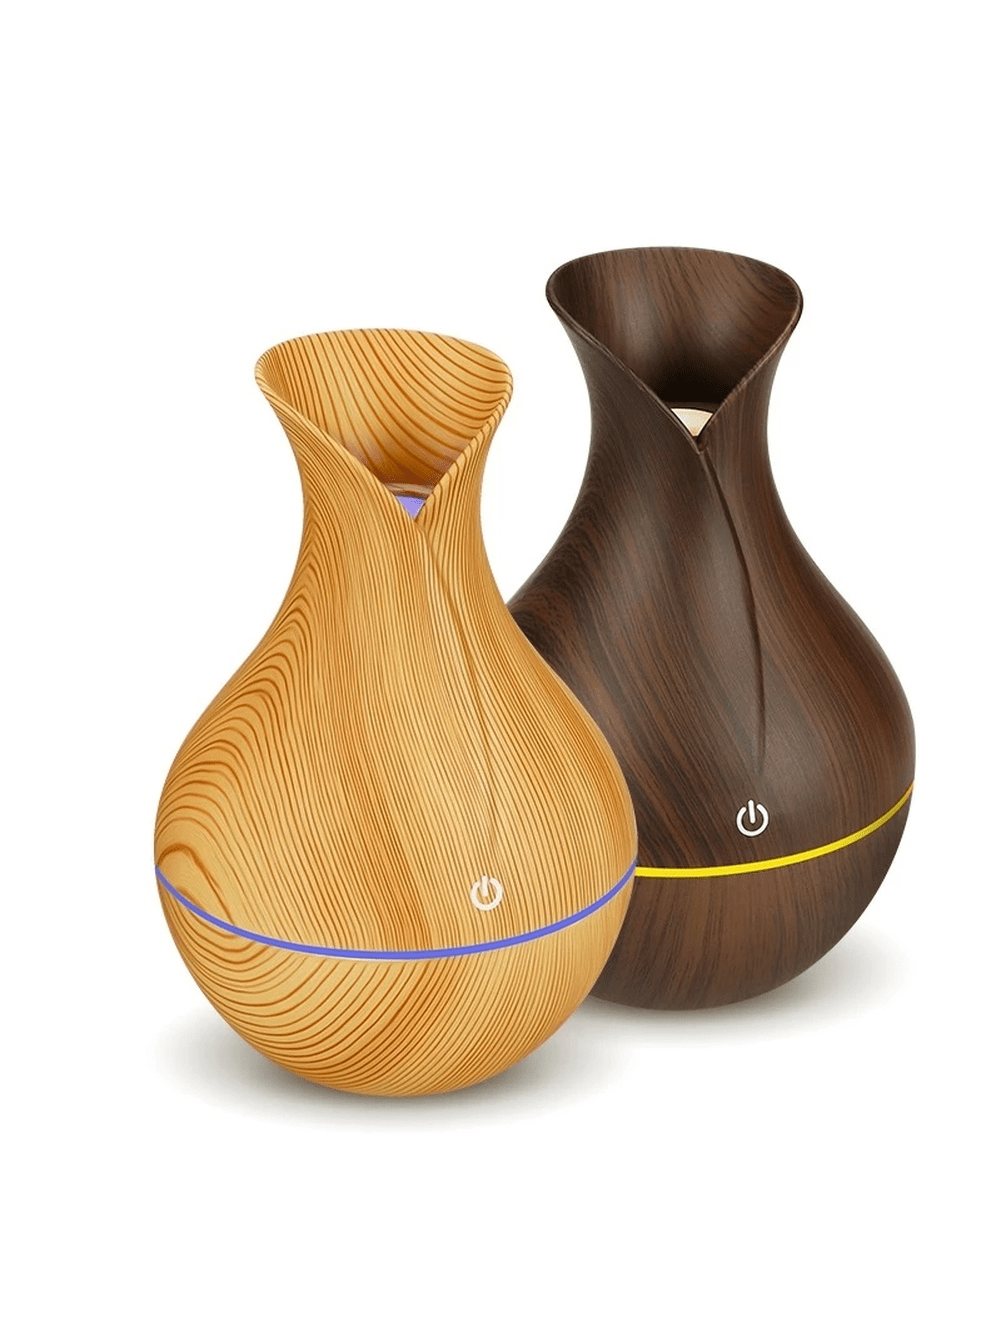 1pc Usb Wood Grain Flower Vase Shaped Humidifier With 7-color Led Light & Aroma Diffuser Function For Home, Office, Car Decoration-light wood grain-1